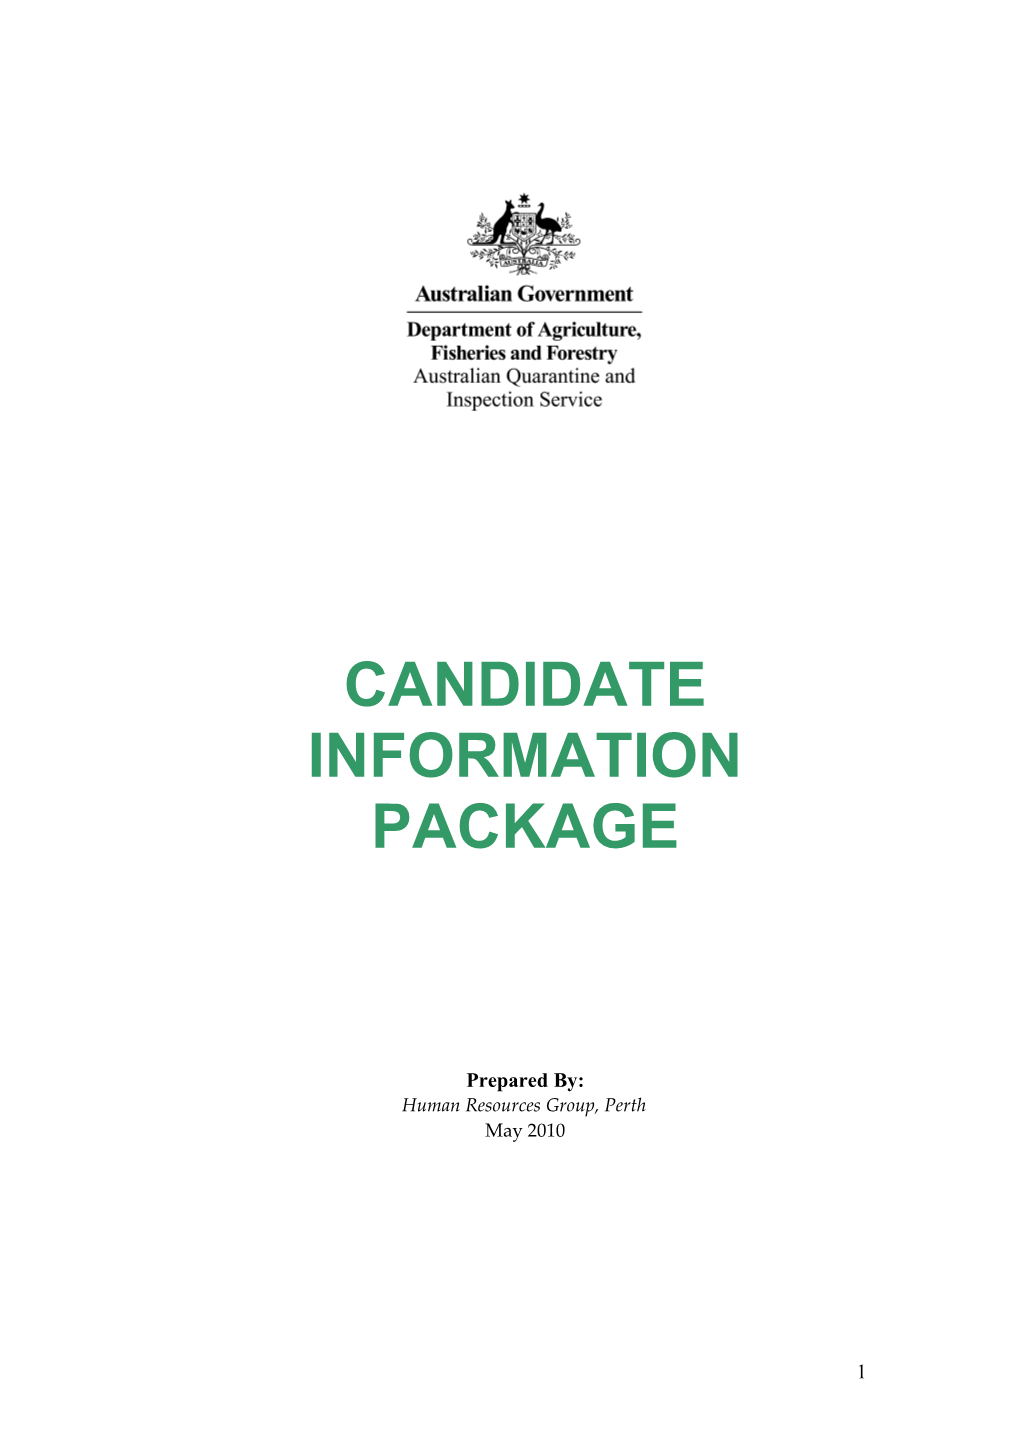 Candidate Information Package